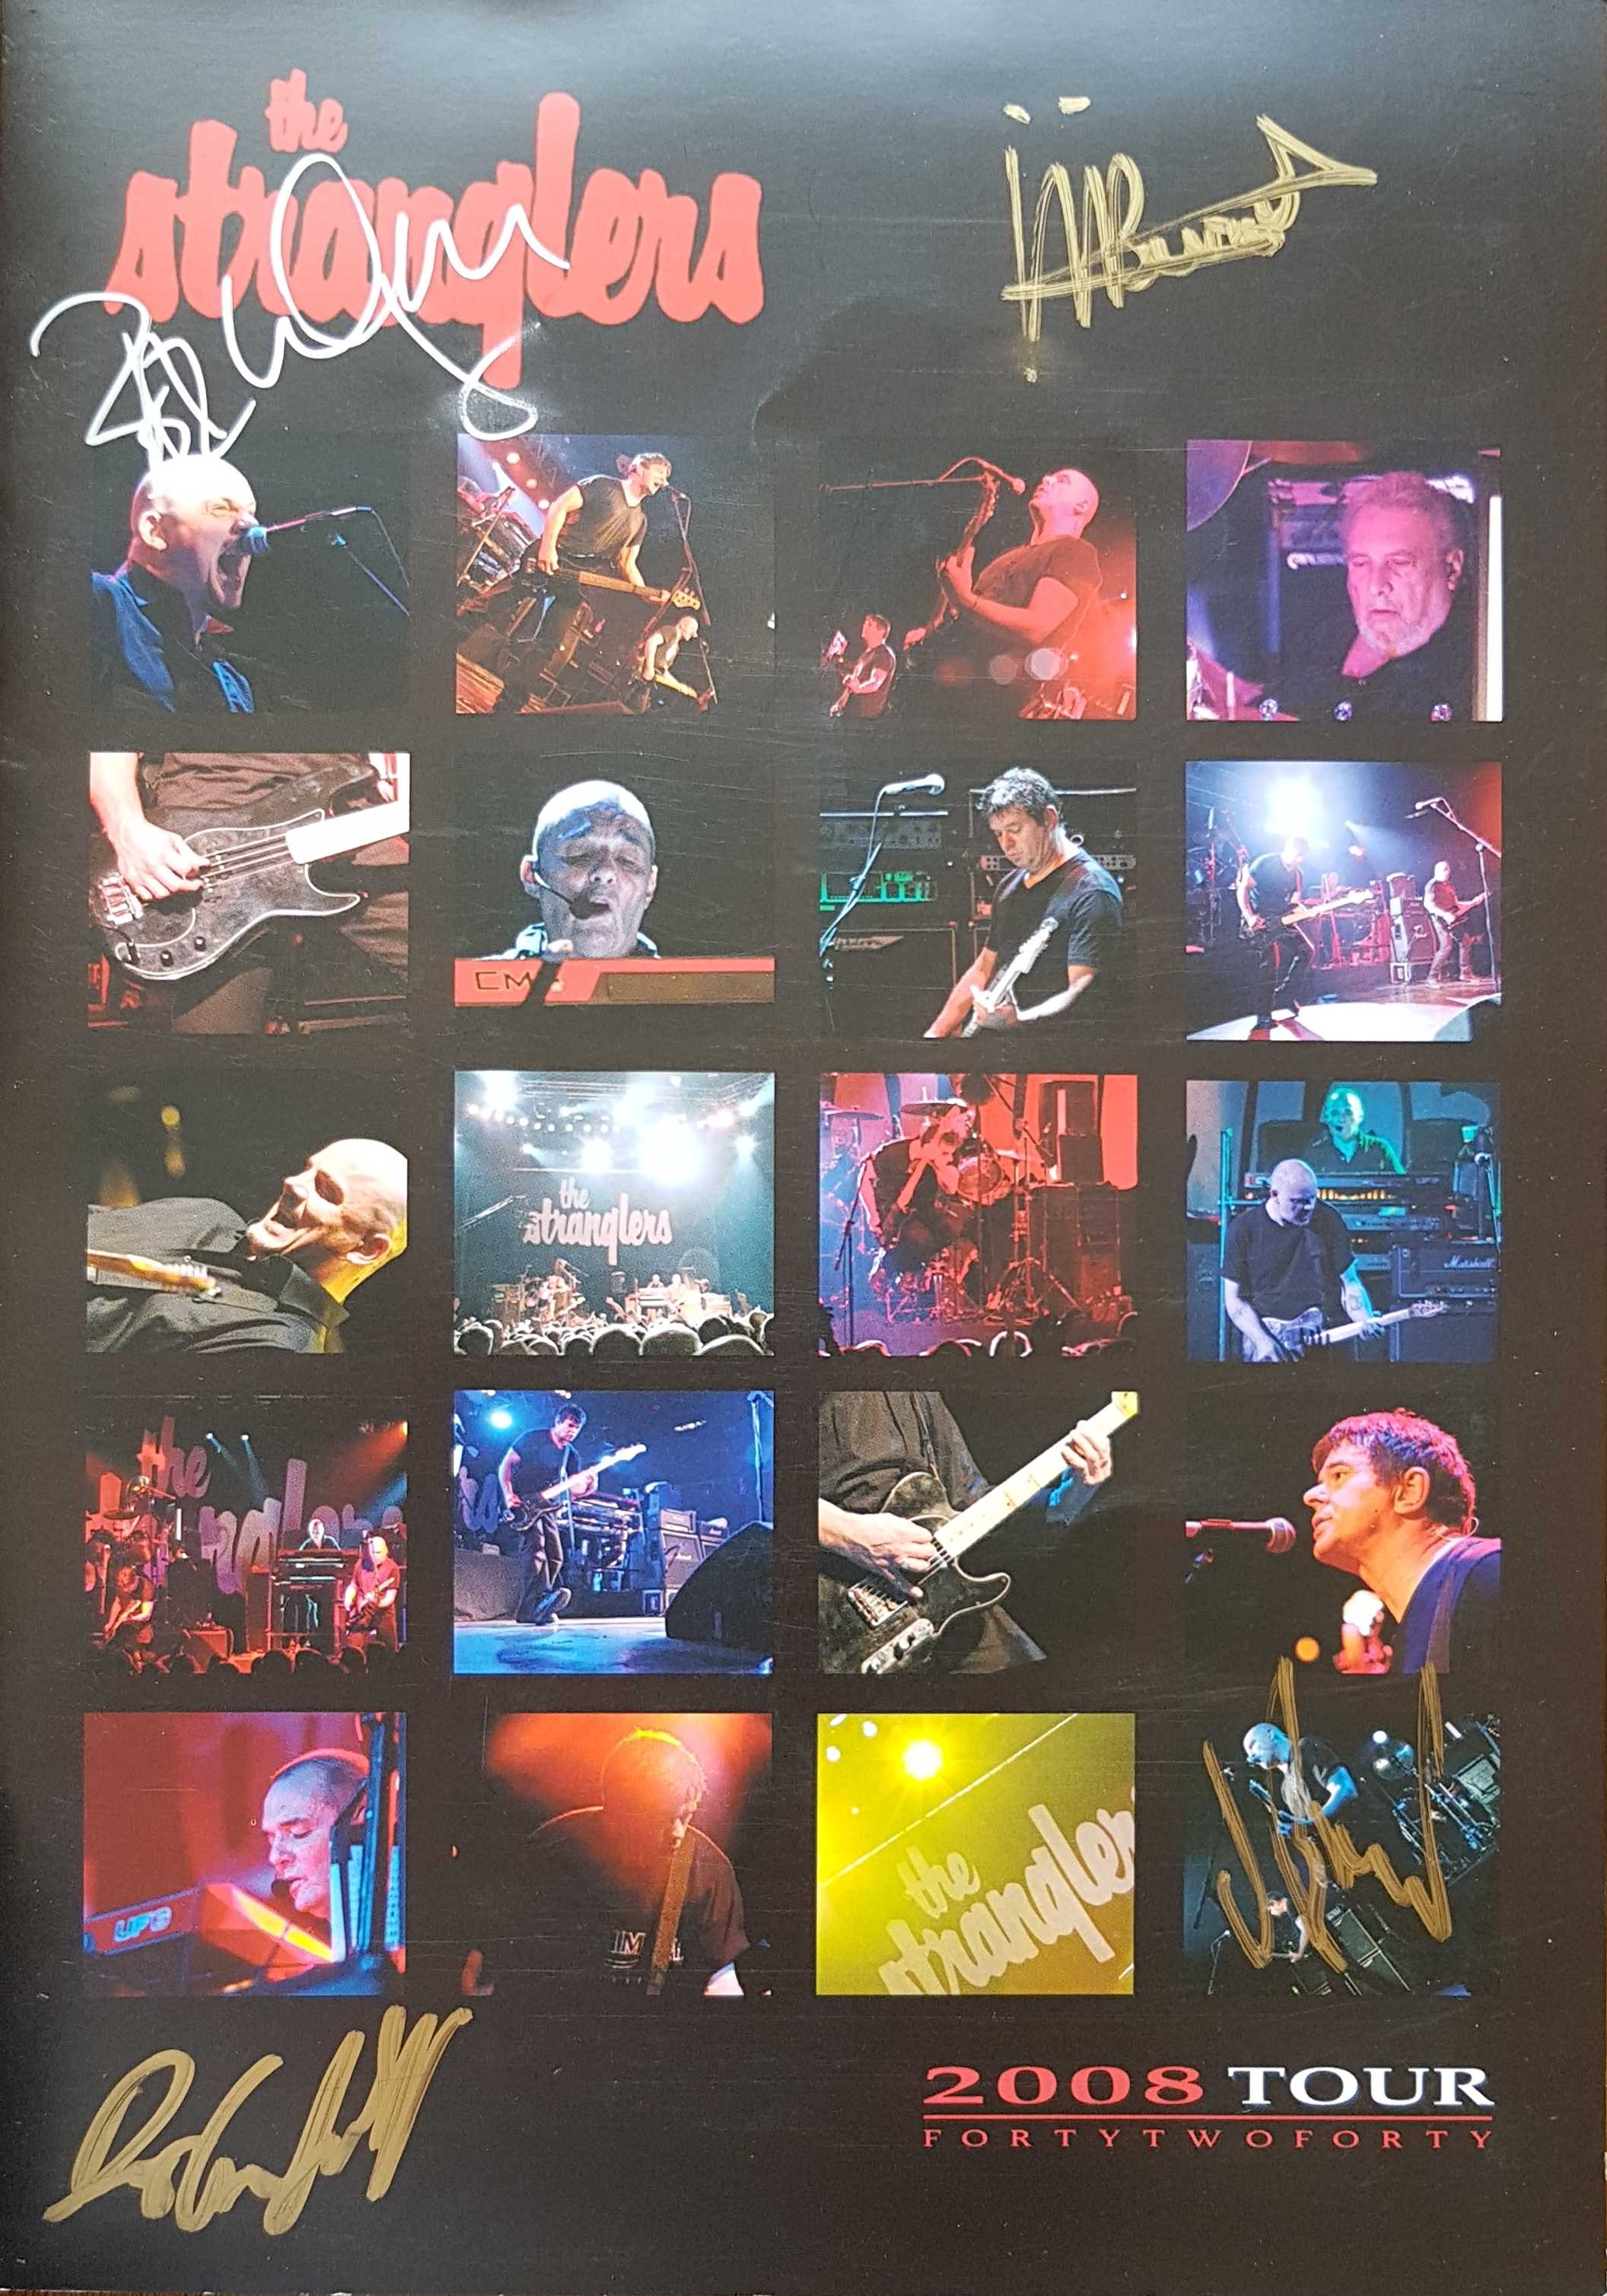 Picture of Books-2008TOUR 2008 tour by artist The Stranglers  from The Stranglers